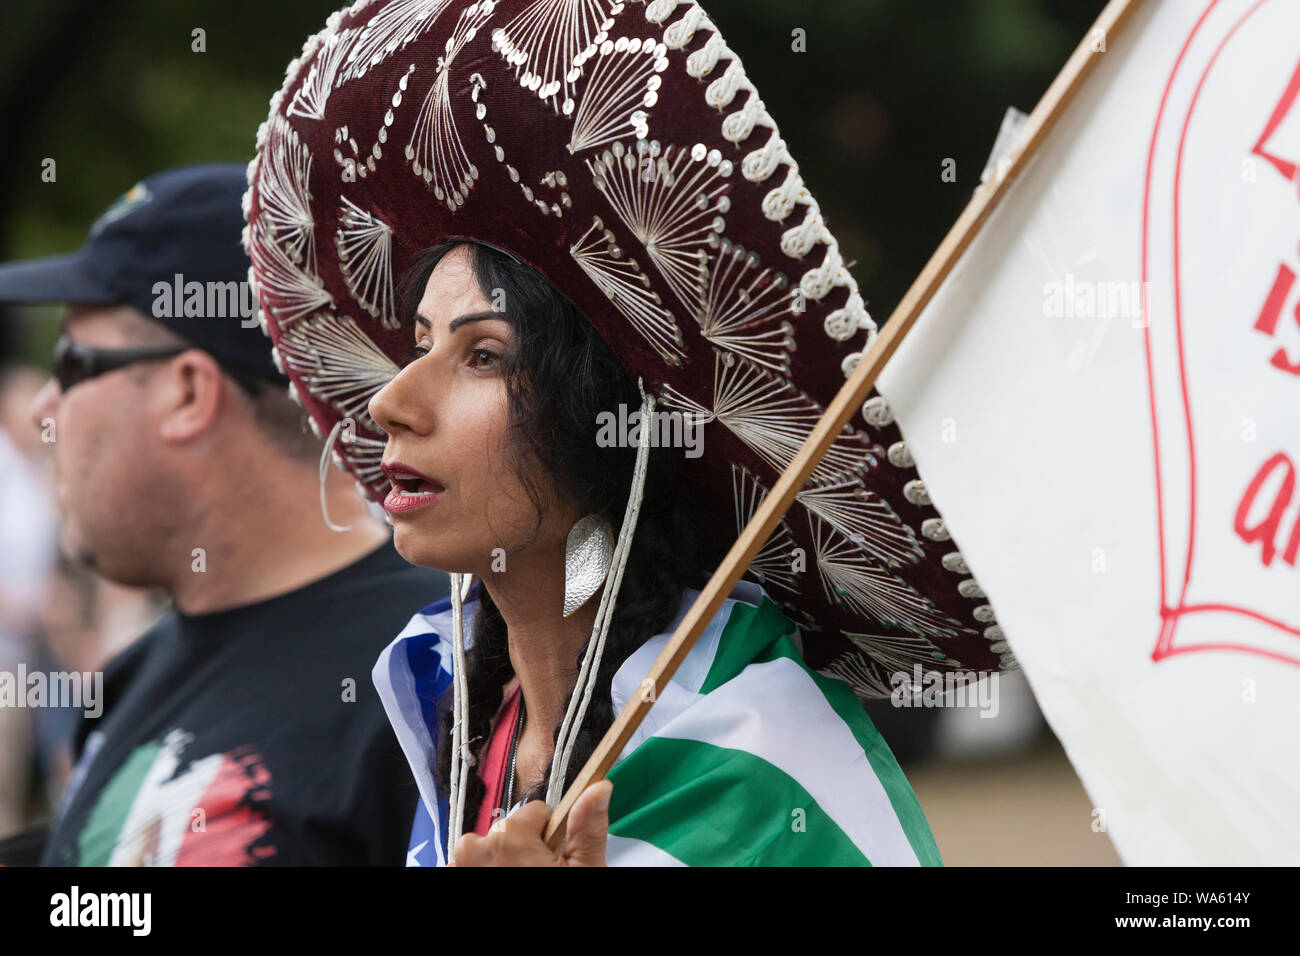 Counterprotesters in Mexican regalia gather during the “End Domestic Terrorism” rally at Tom McCall Waterfront Park on August 17, 2019 in Portland, Oregon. Organized as a protest against anti-fascists by right-wing radio host Joe Biggs and members of the Proud Boys, the rally attracted a large contingent of counterprotesters including Rose City Antifa. PopMob (Popular Mobilization) is a local group of activists with a goal of inspiring people to resist the alt-right through art, self-expression and performance. Stock Photo